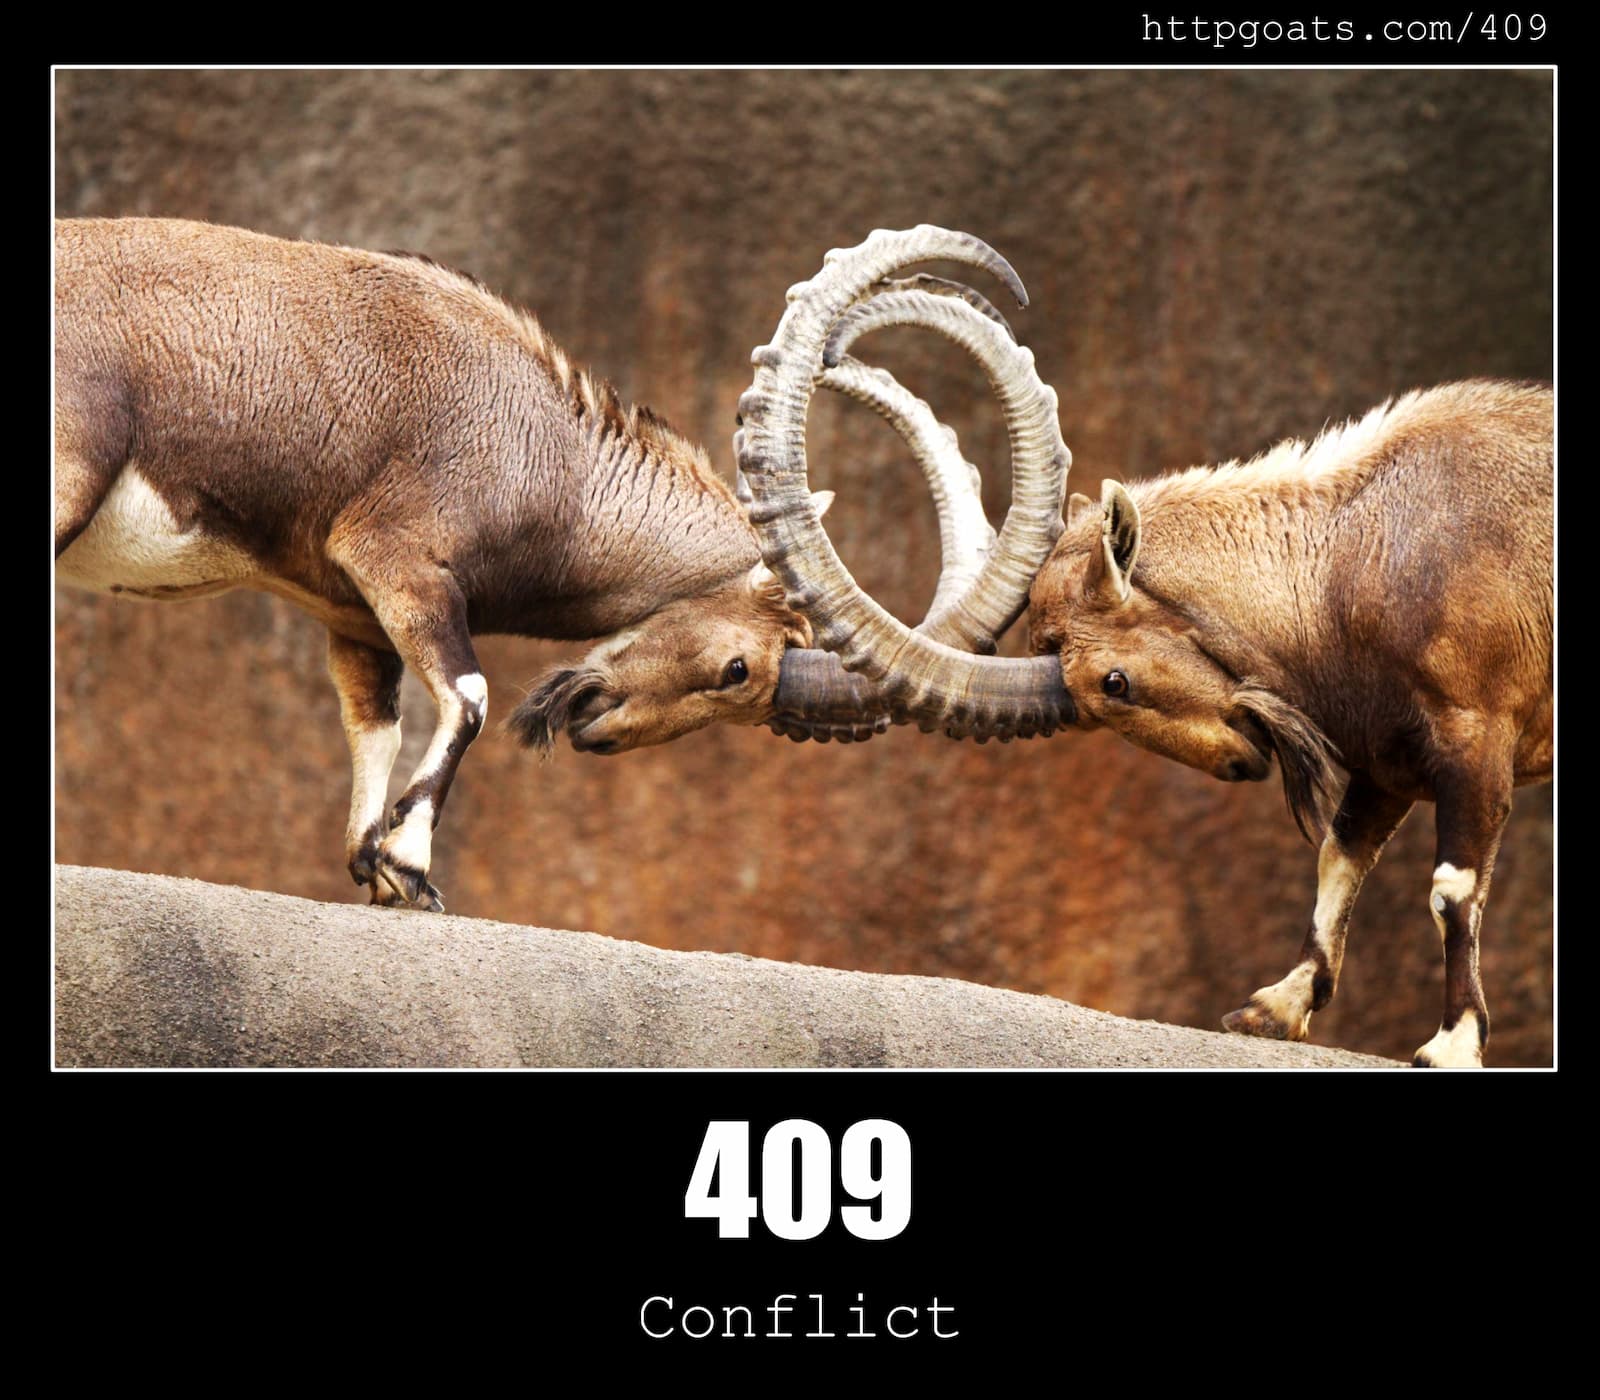 HTTP Status Code 409 Conflict & Goats